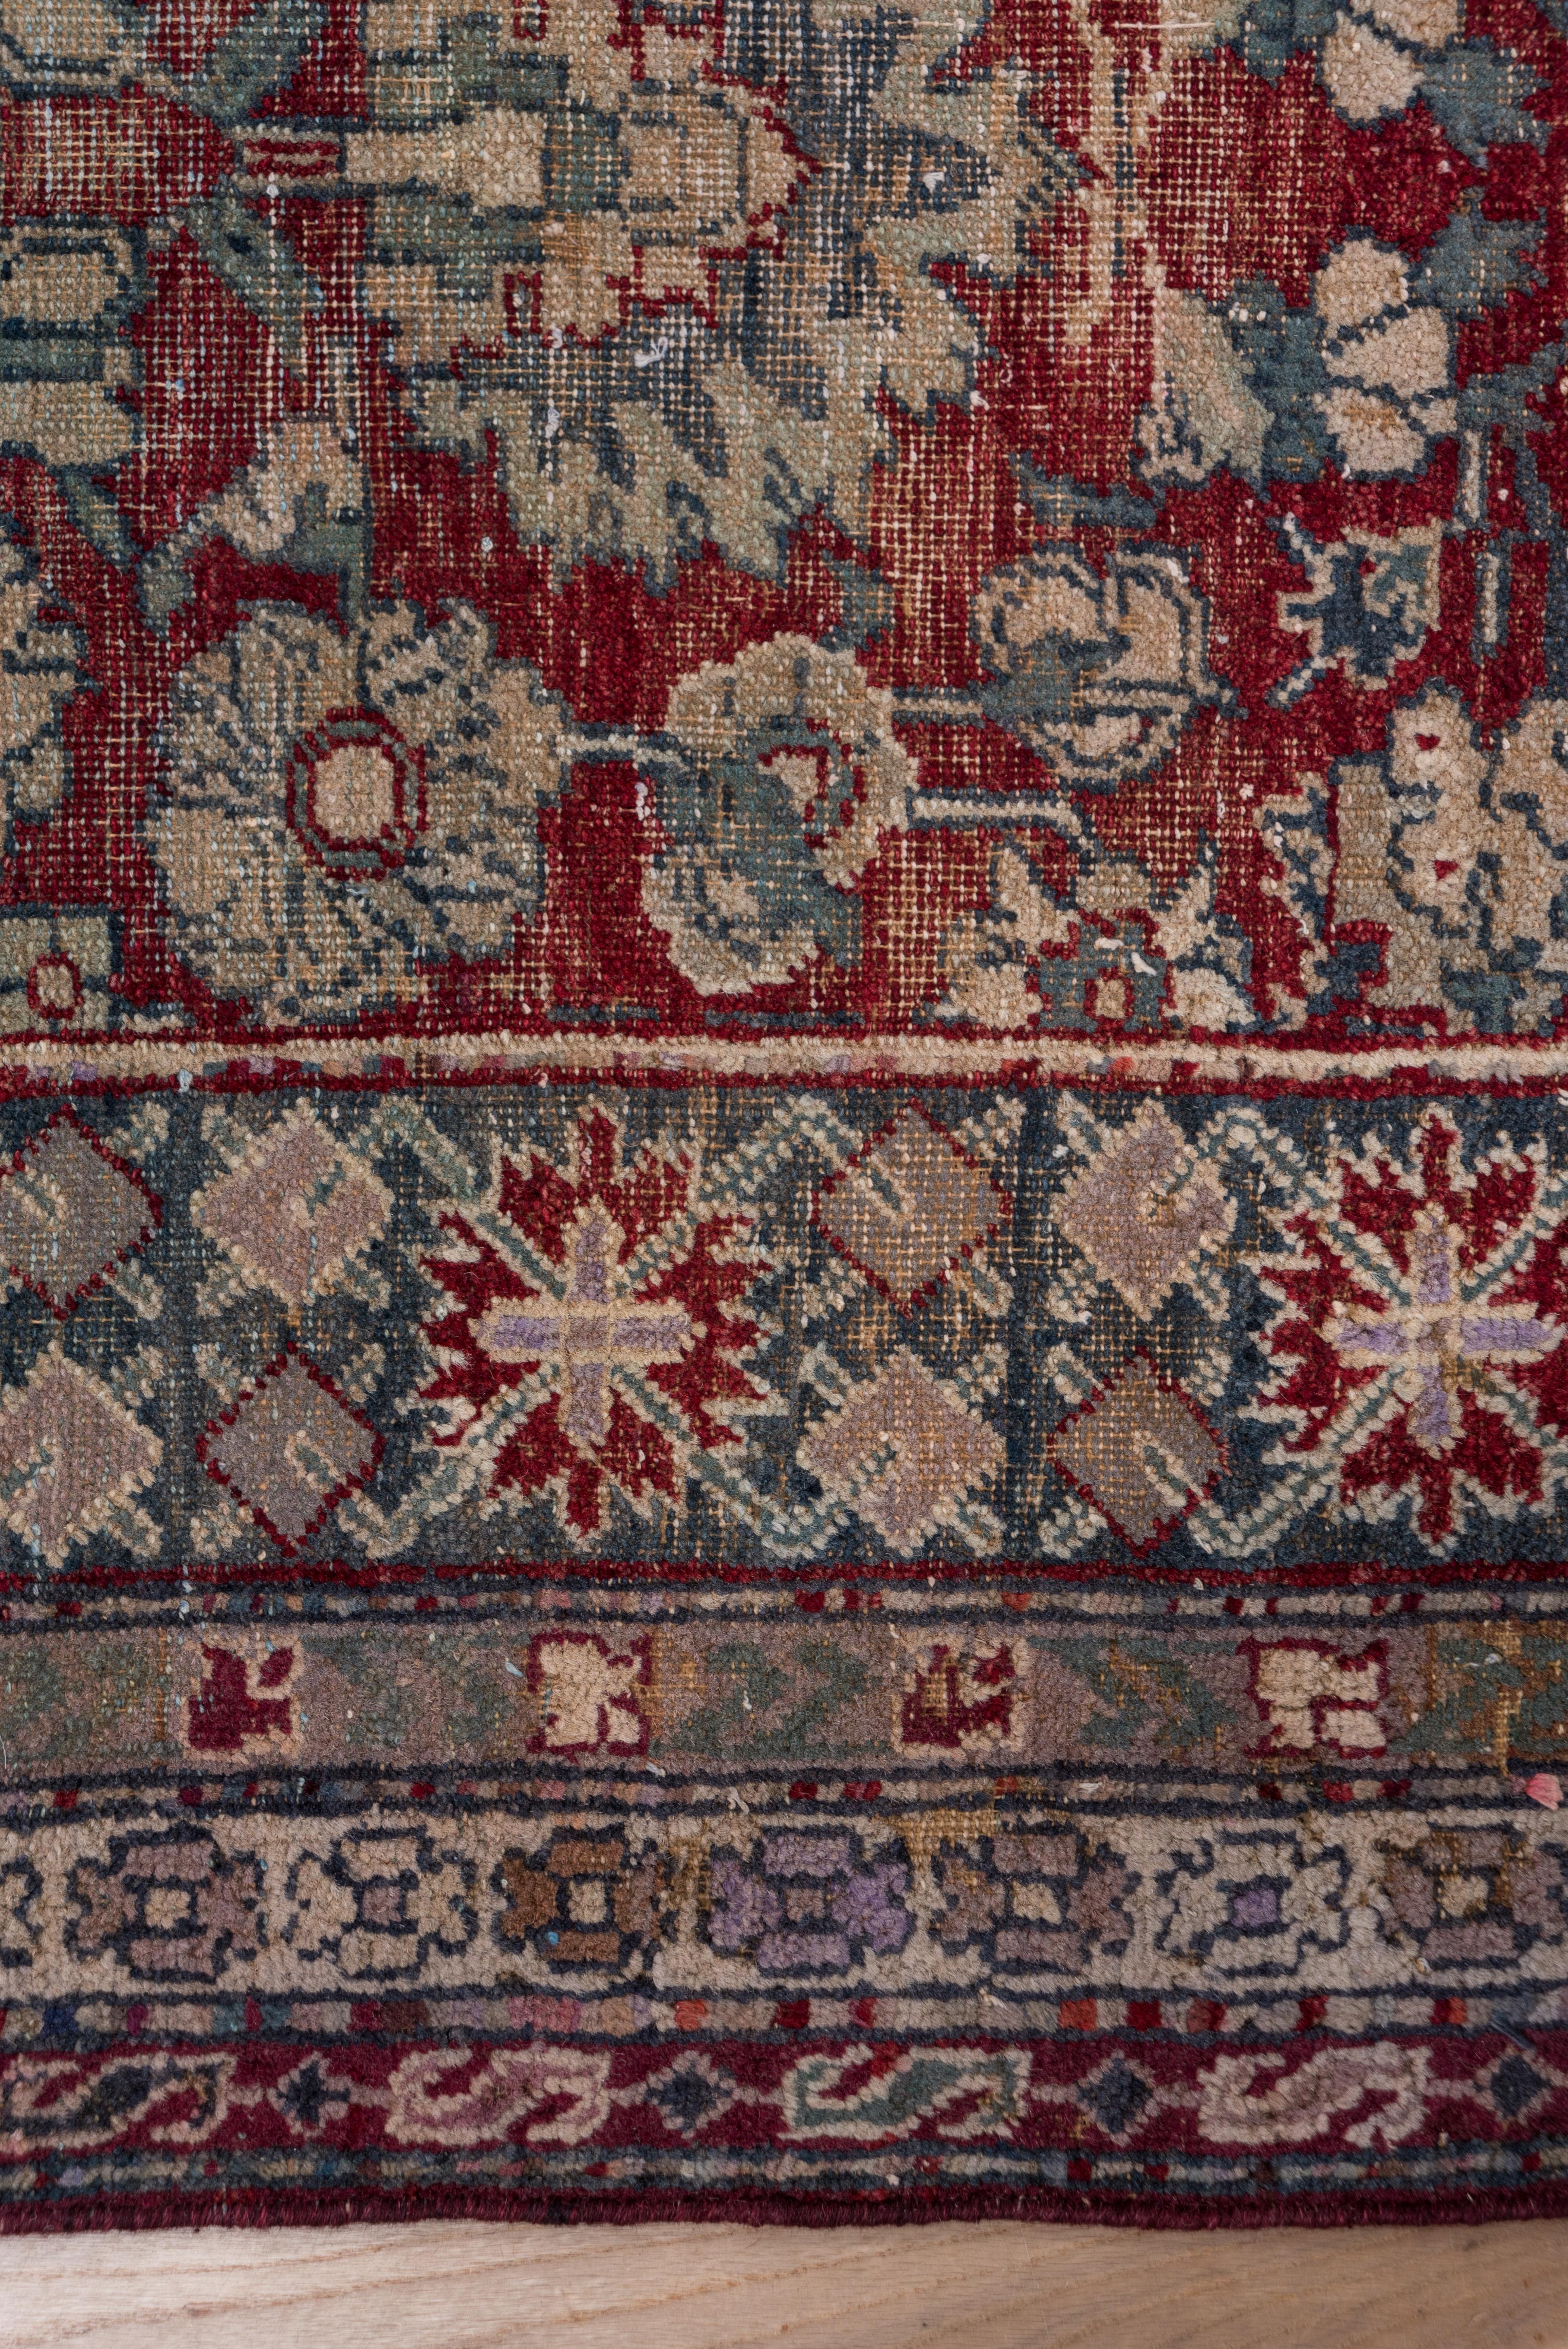 Hand-Knotted Indian Agra Carpet, Burgundy Field